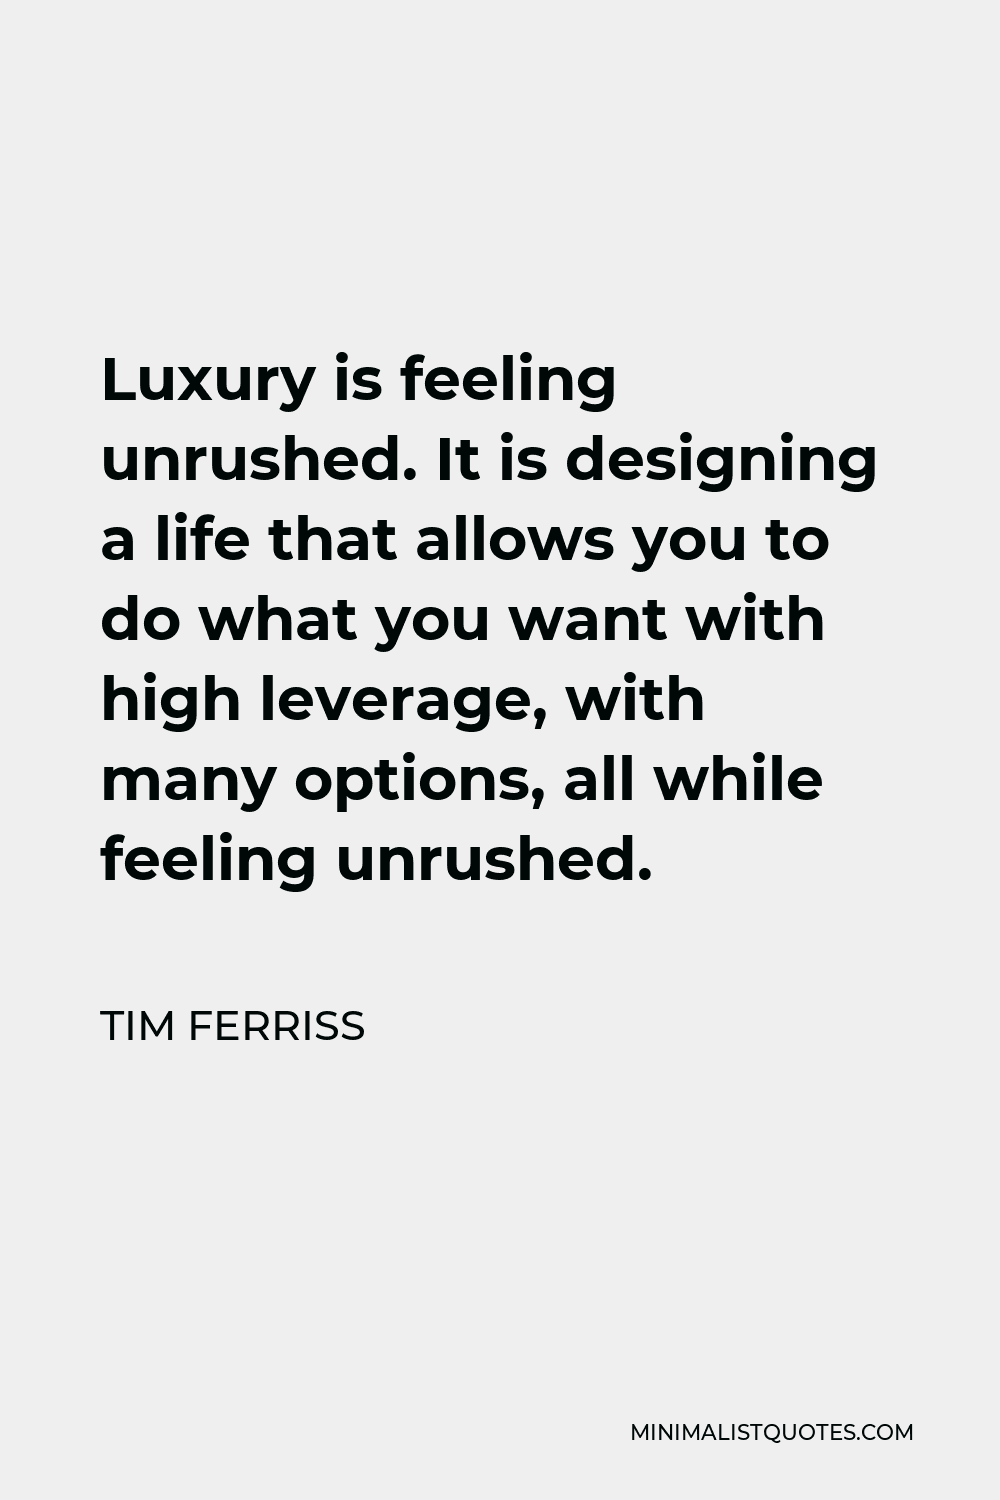 Tim Ferriss Quote - Luxury is feeling unrushed. It is designing a life that allows you to do what you want with high leverage, with many options, all while feeling unrushed.